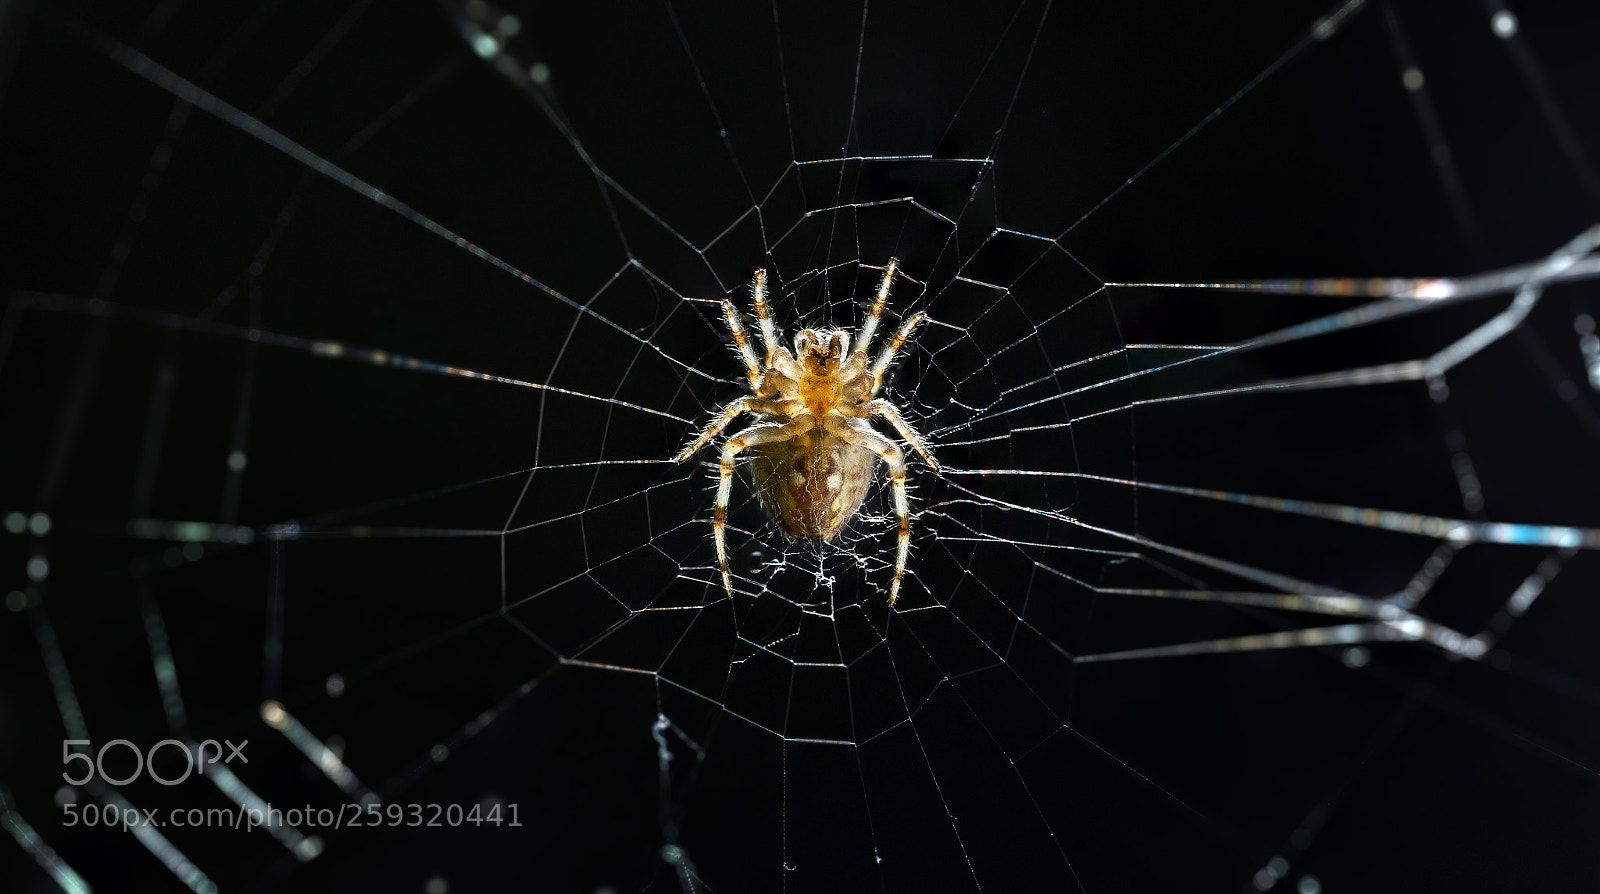 Nikon D610 sample photo. Spider center of the photography